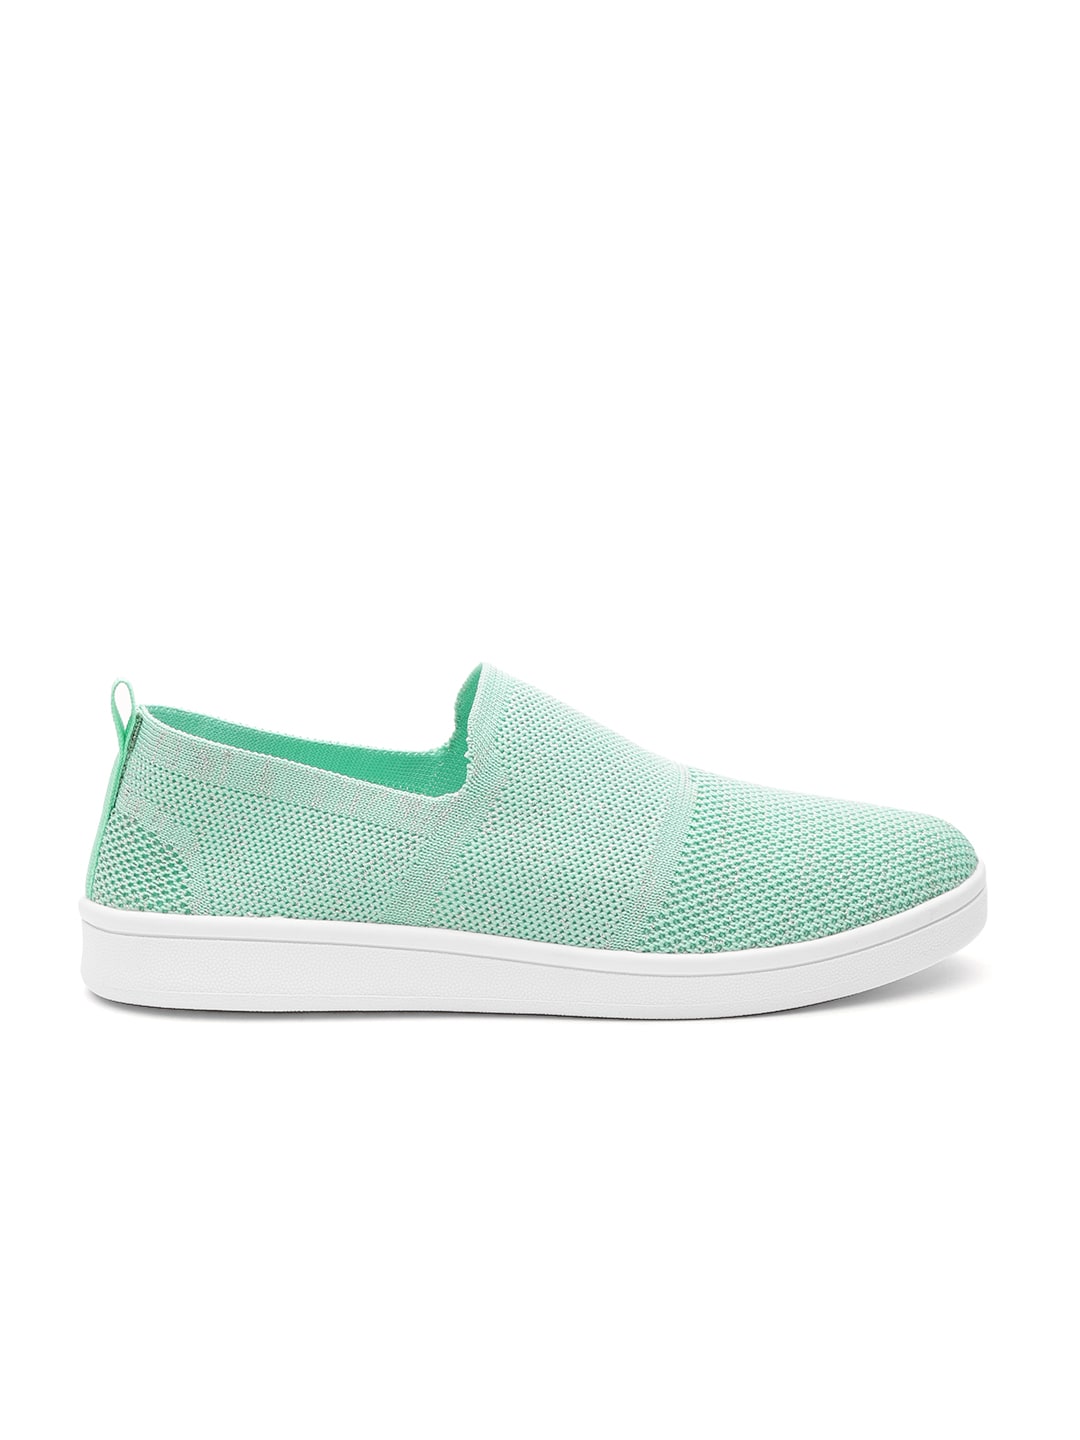 ether slip on sneakers